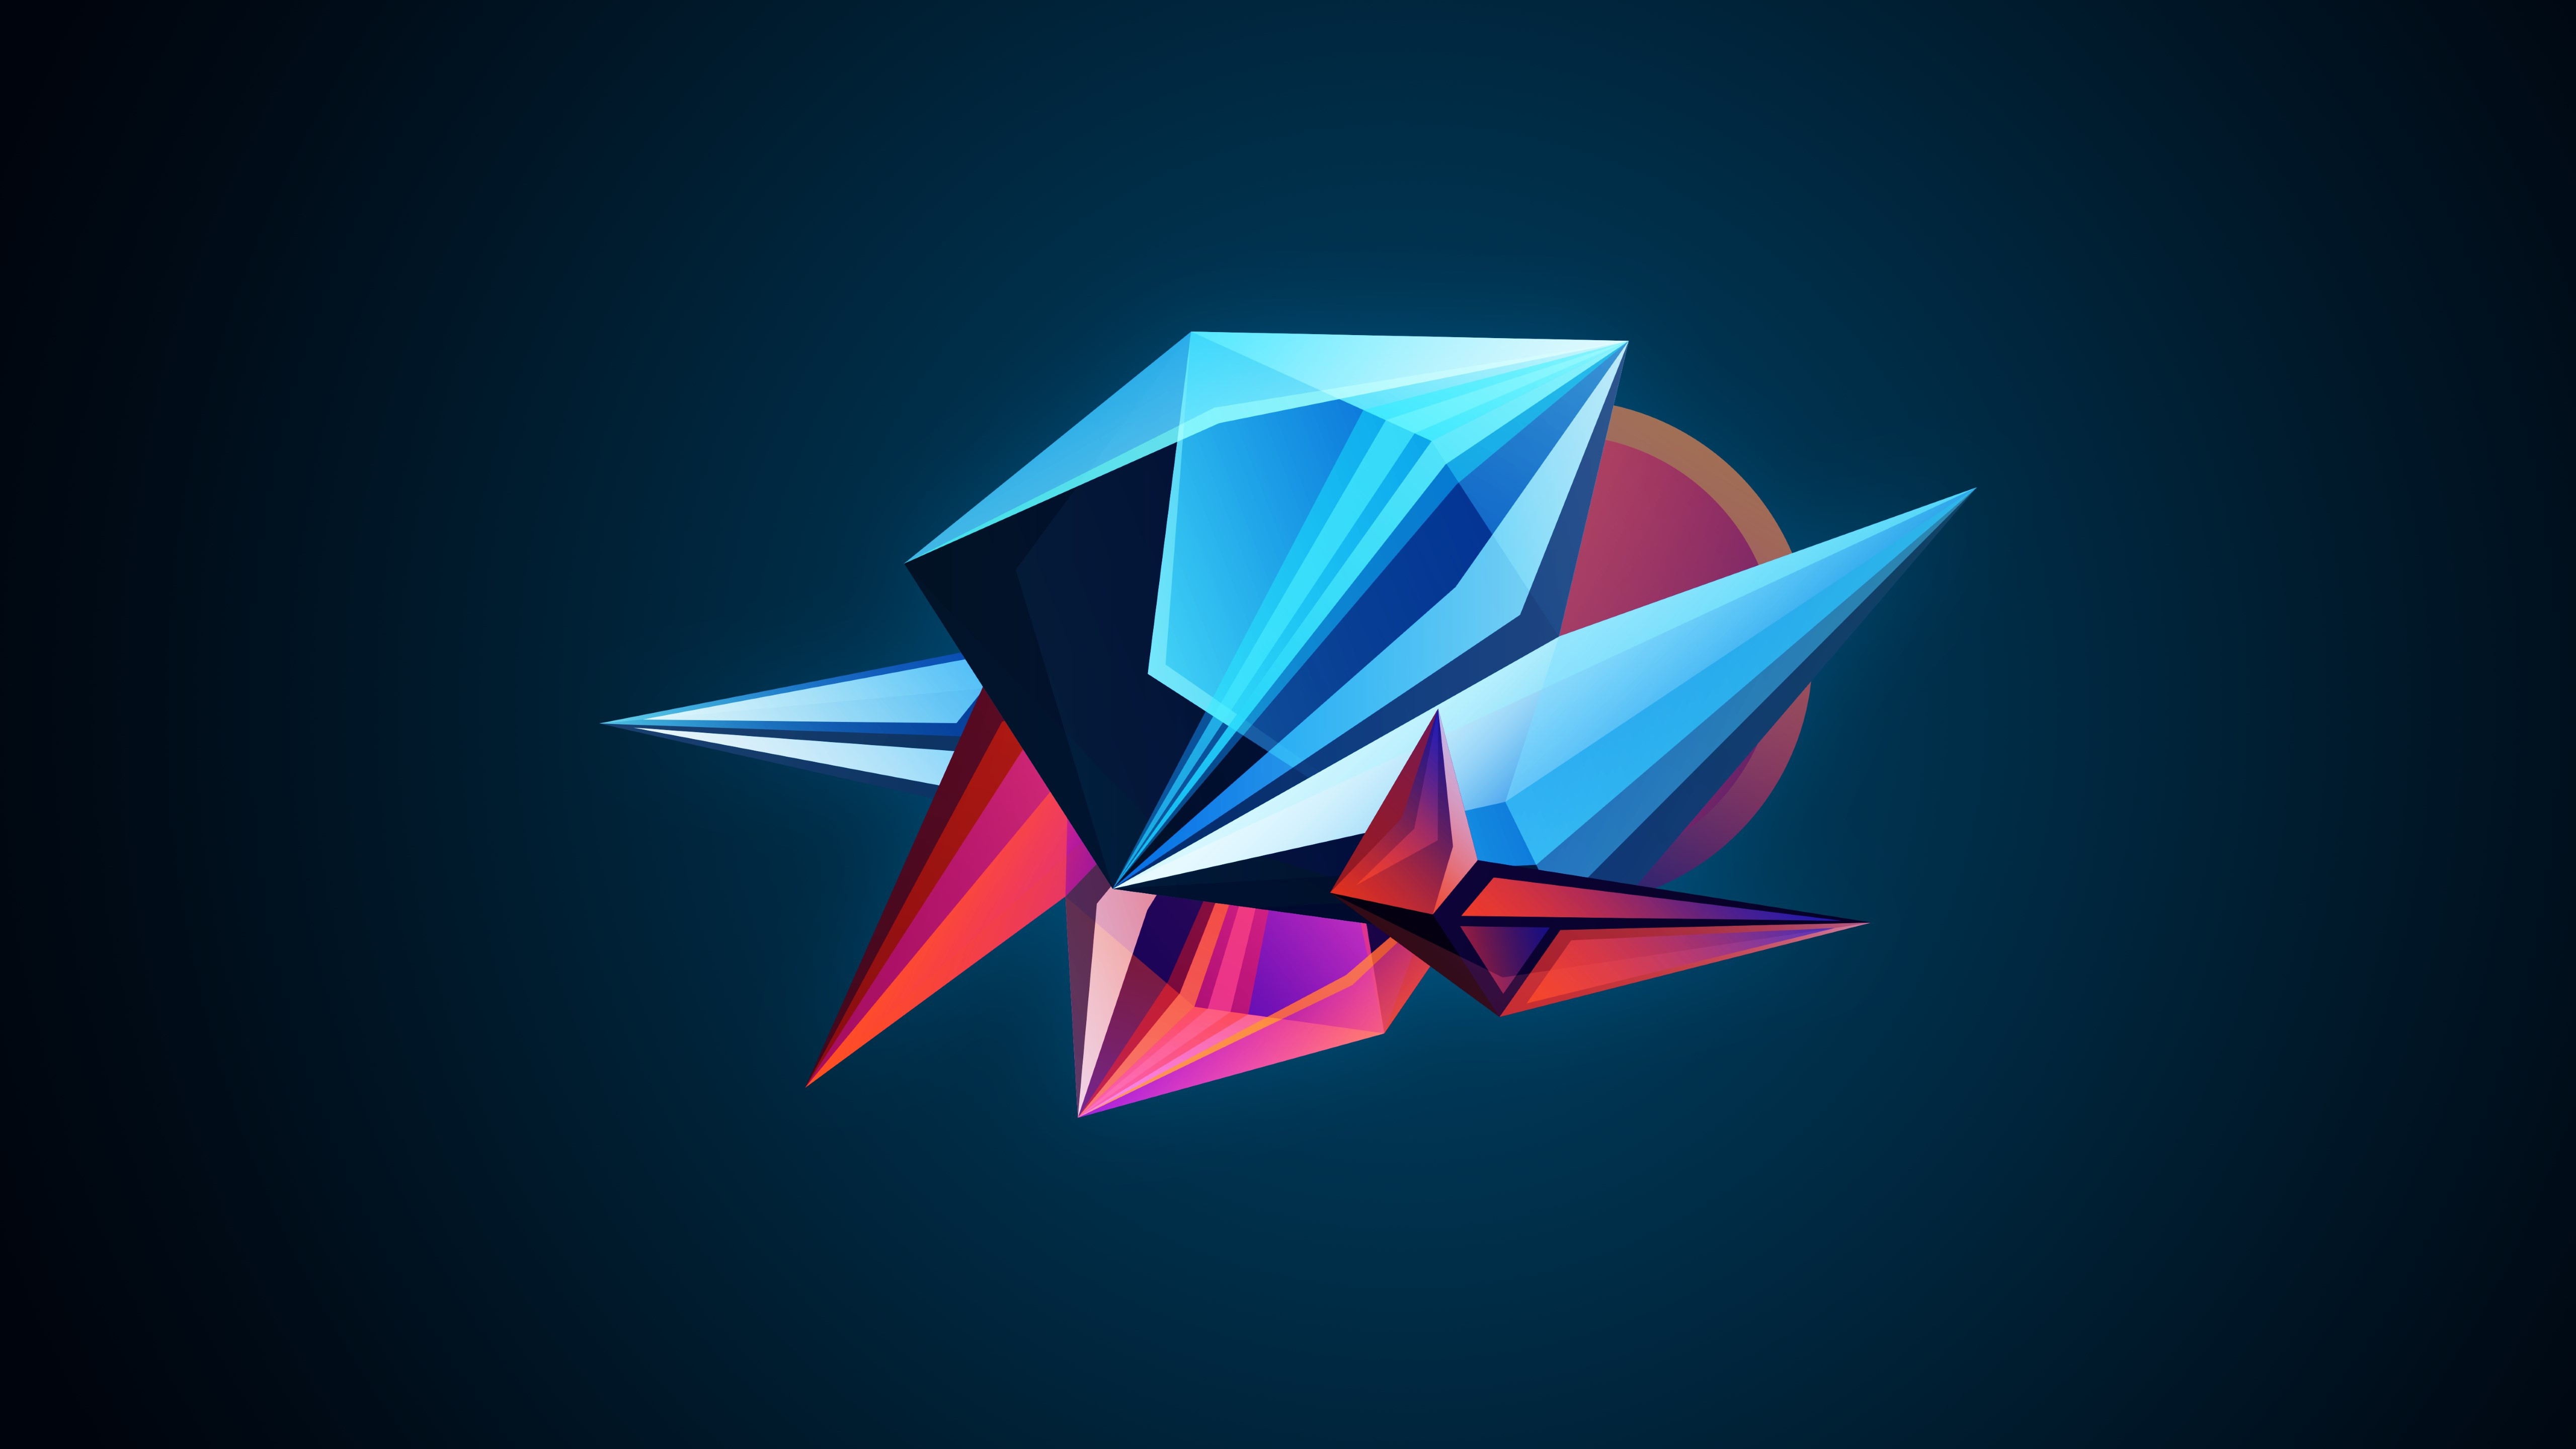 Abstract 3D shapes wallpaper 5120x2880